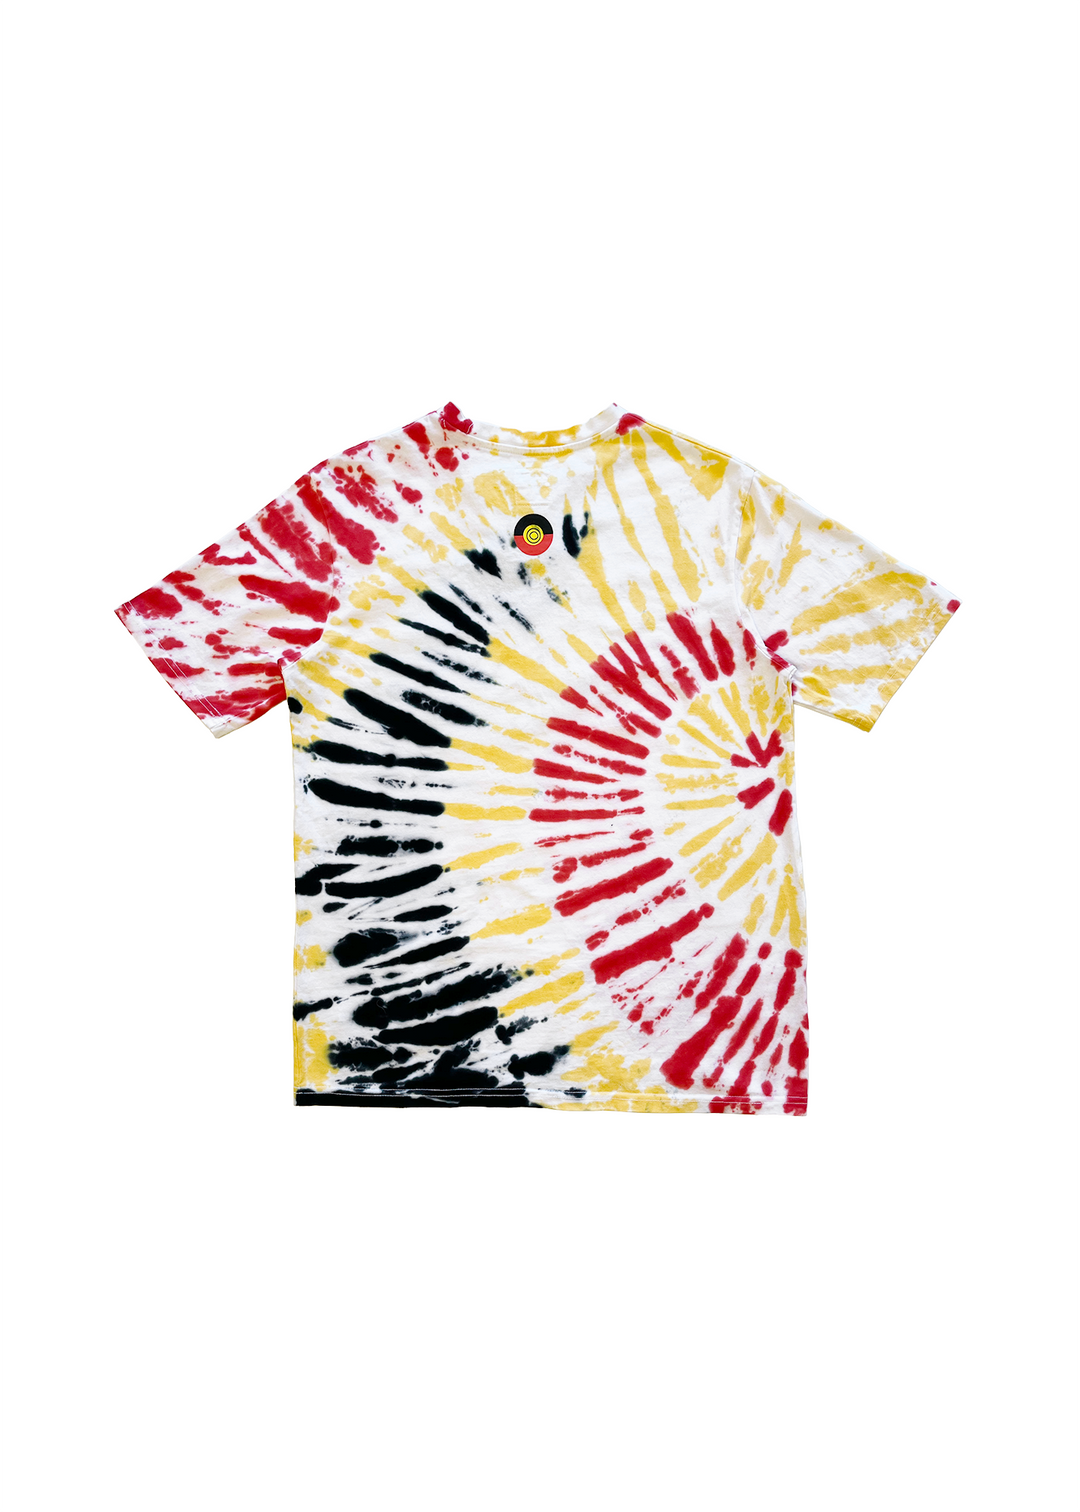 Clothing The Gaps. Tie Dye Spirit Tee. White T-shirt. With Red, black and yellow tie died in random pattern. Has embroidered 'Clothing The Gaps' on front chest with minimalist font in black text with a yellow and red outline and 'Narrm' in black embroidered underneath, acknowledging the land on which Clothing The Gaps operates it's social enterprise.